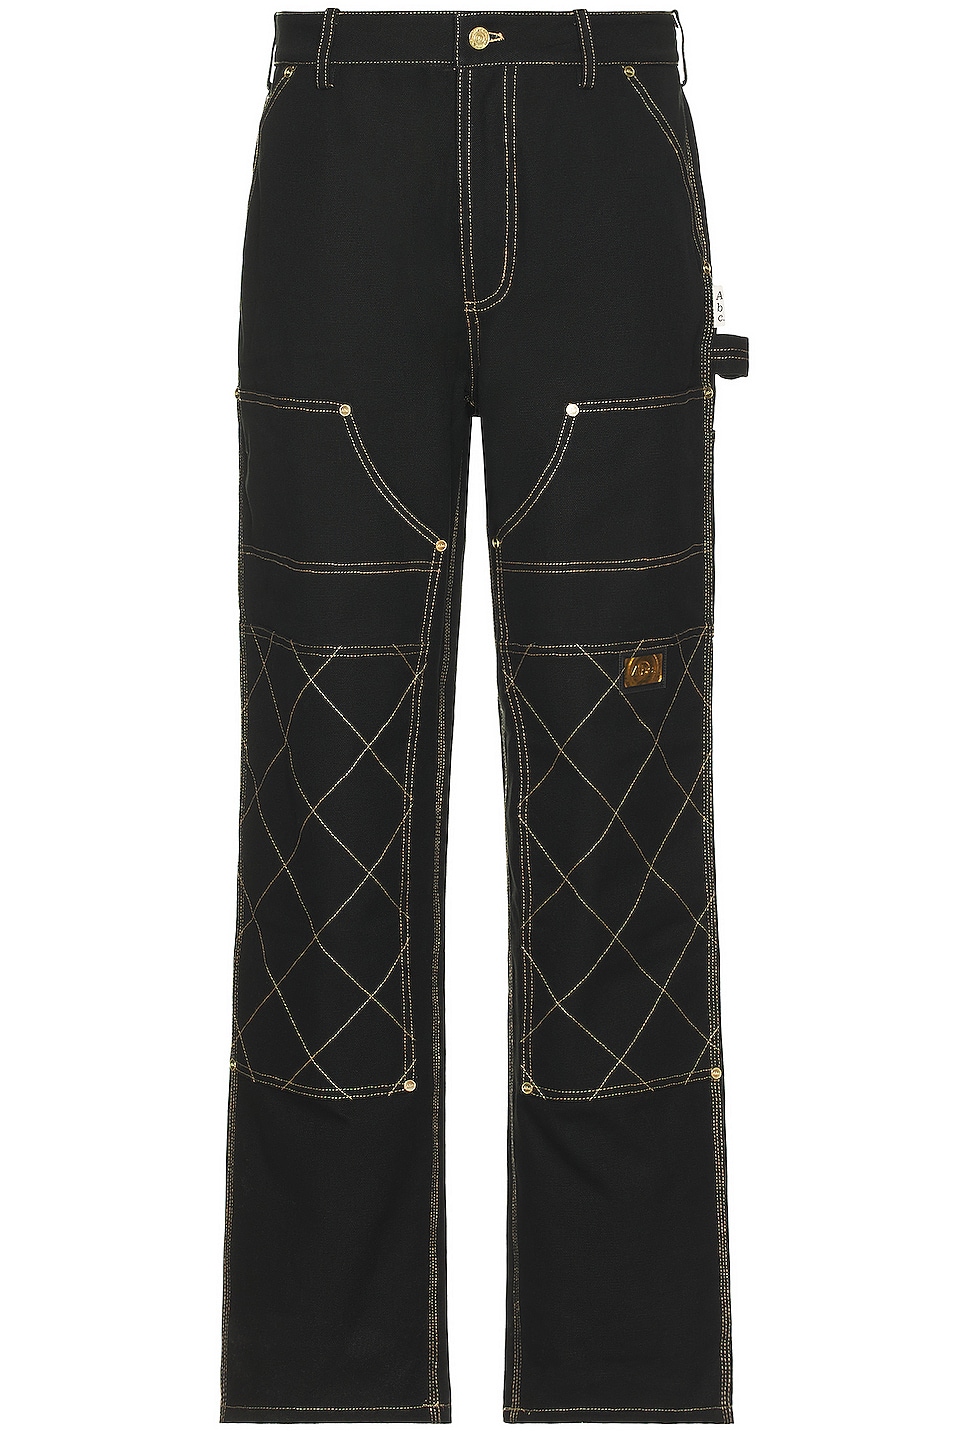 Image 1 of Advisory Board Crystals Diamond Stitch Double Knee Pant in Anthracite Black